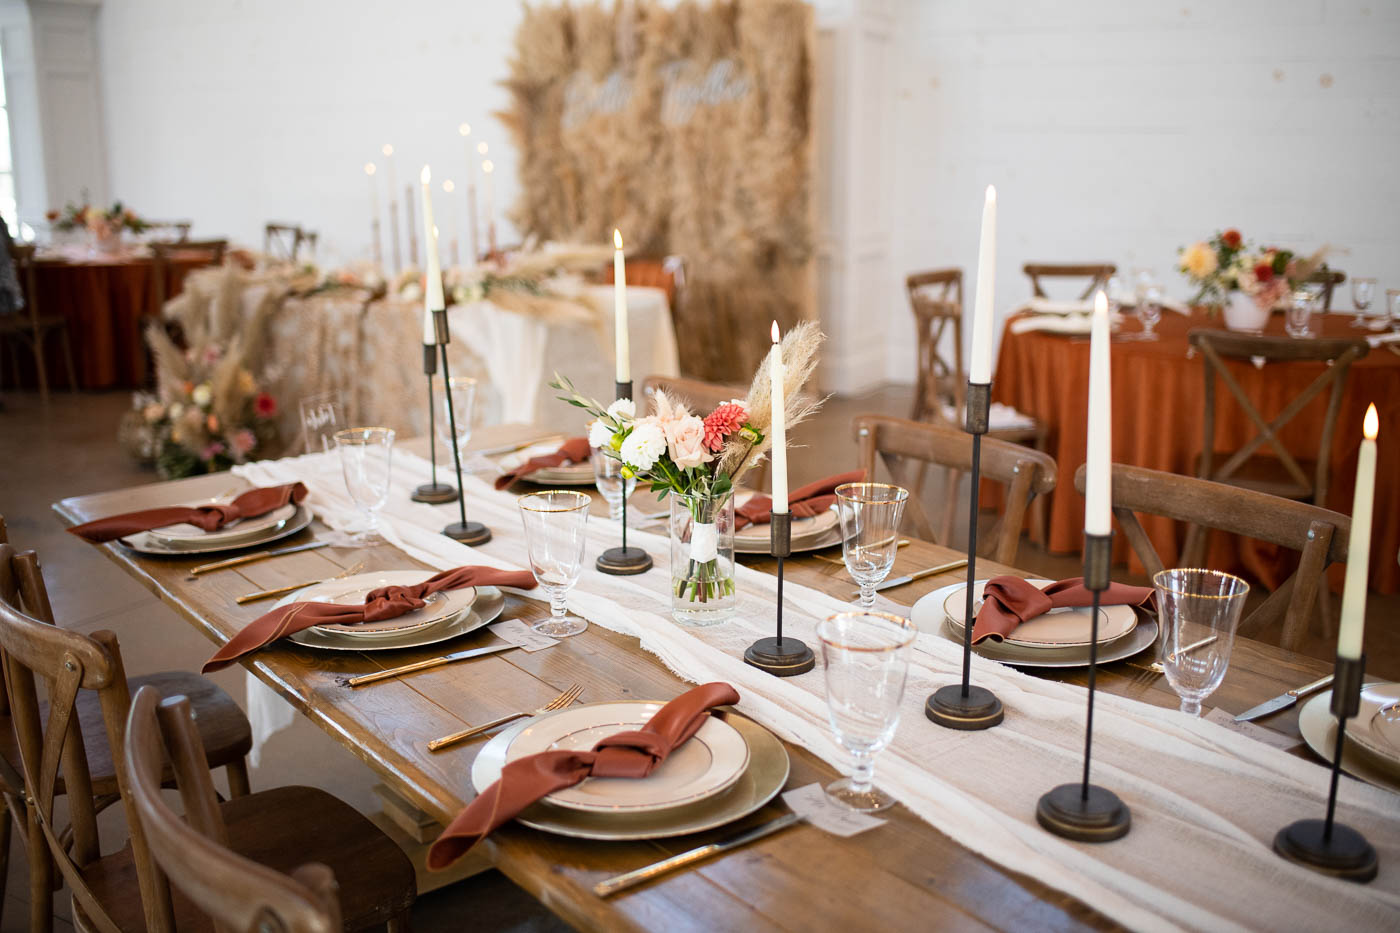 Close up photo of table settings